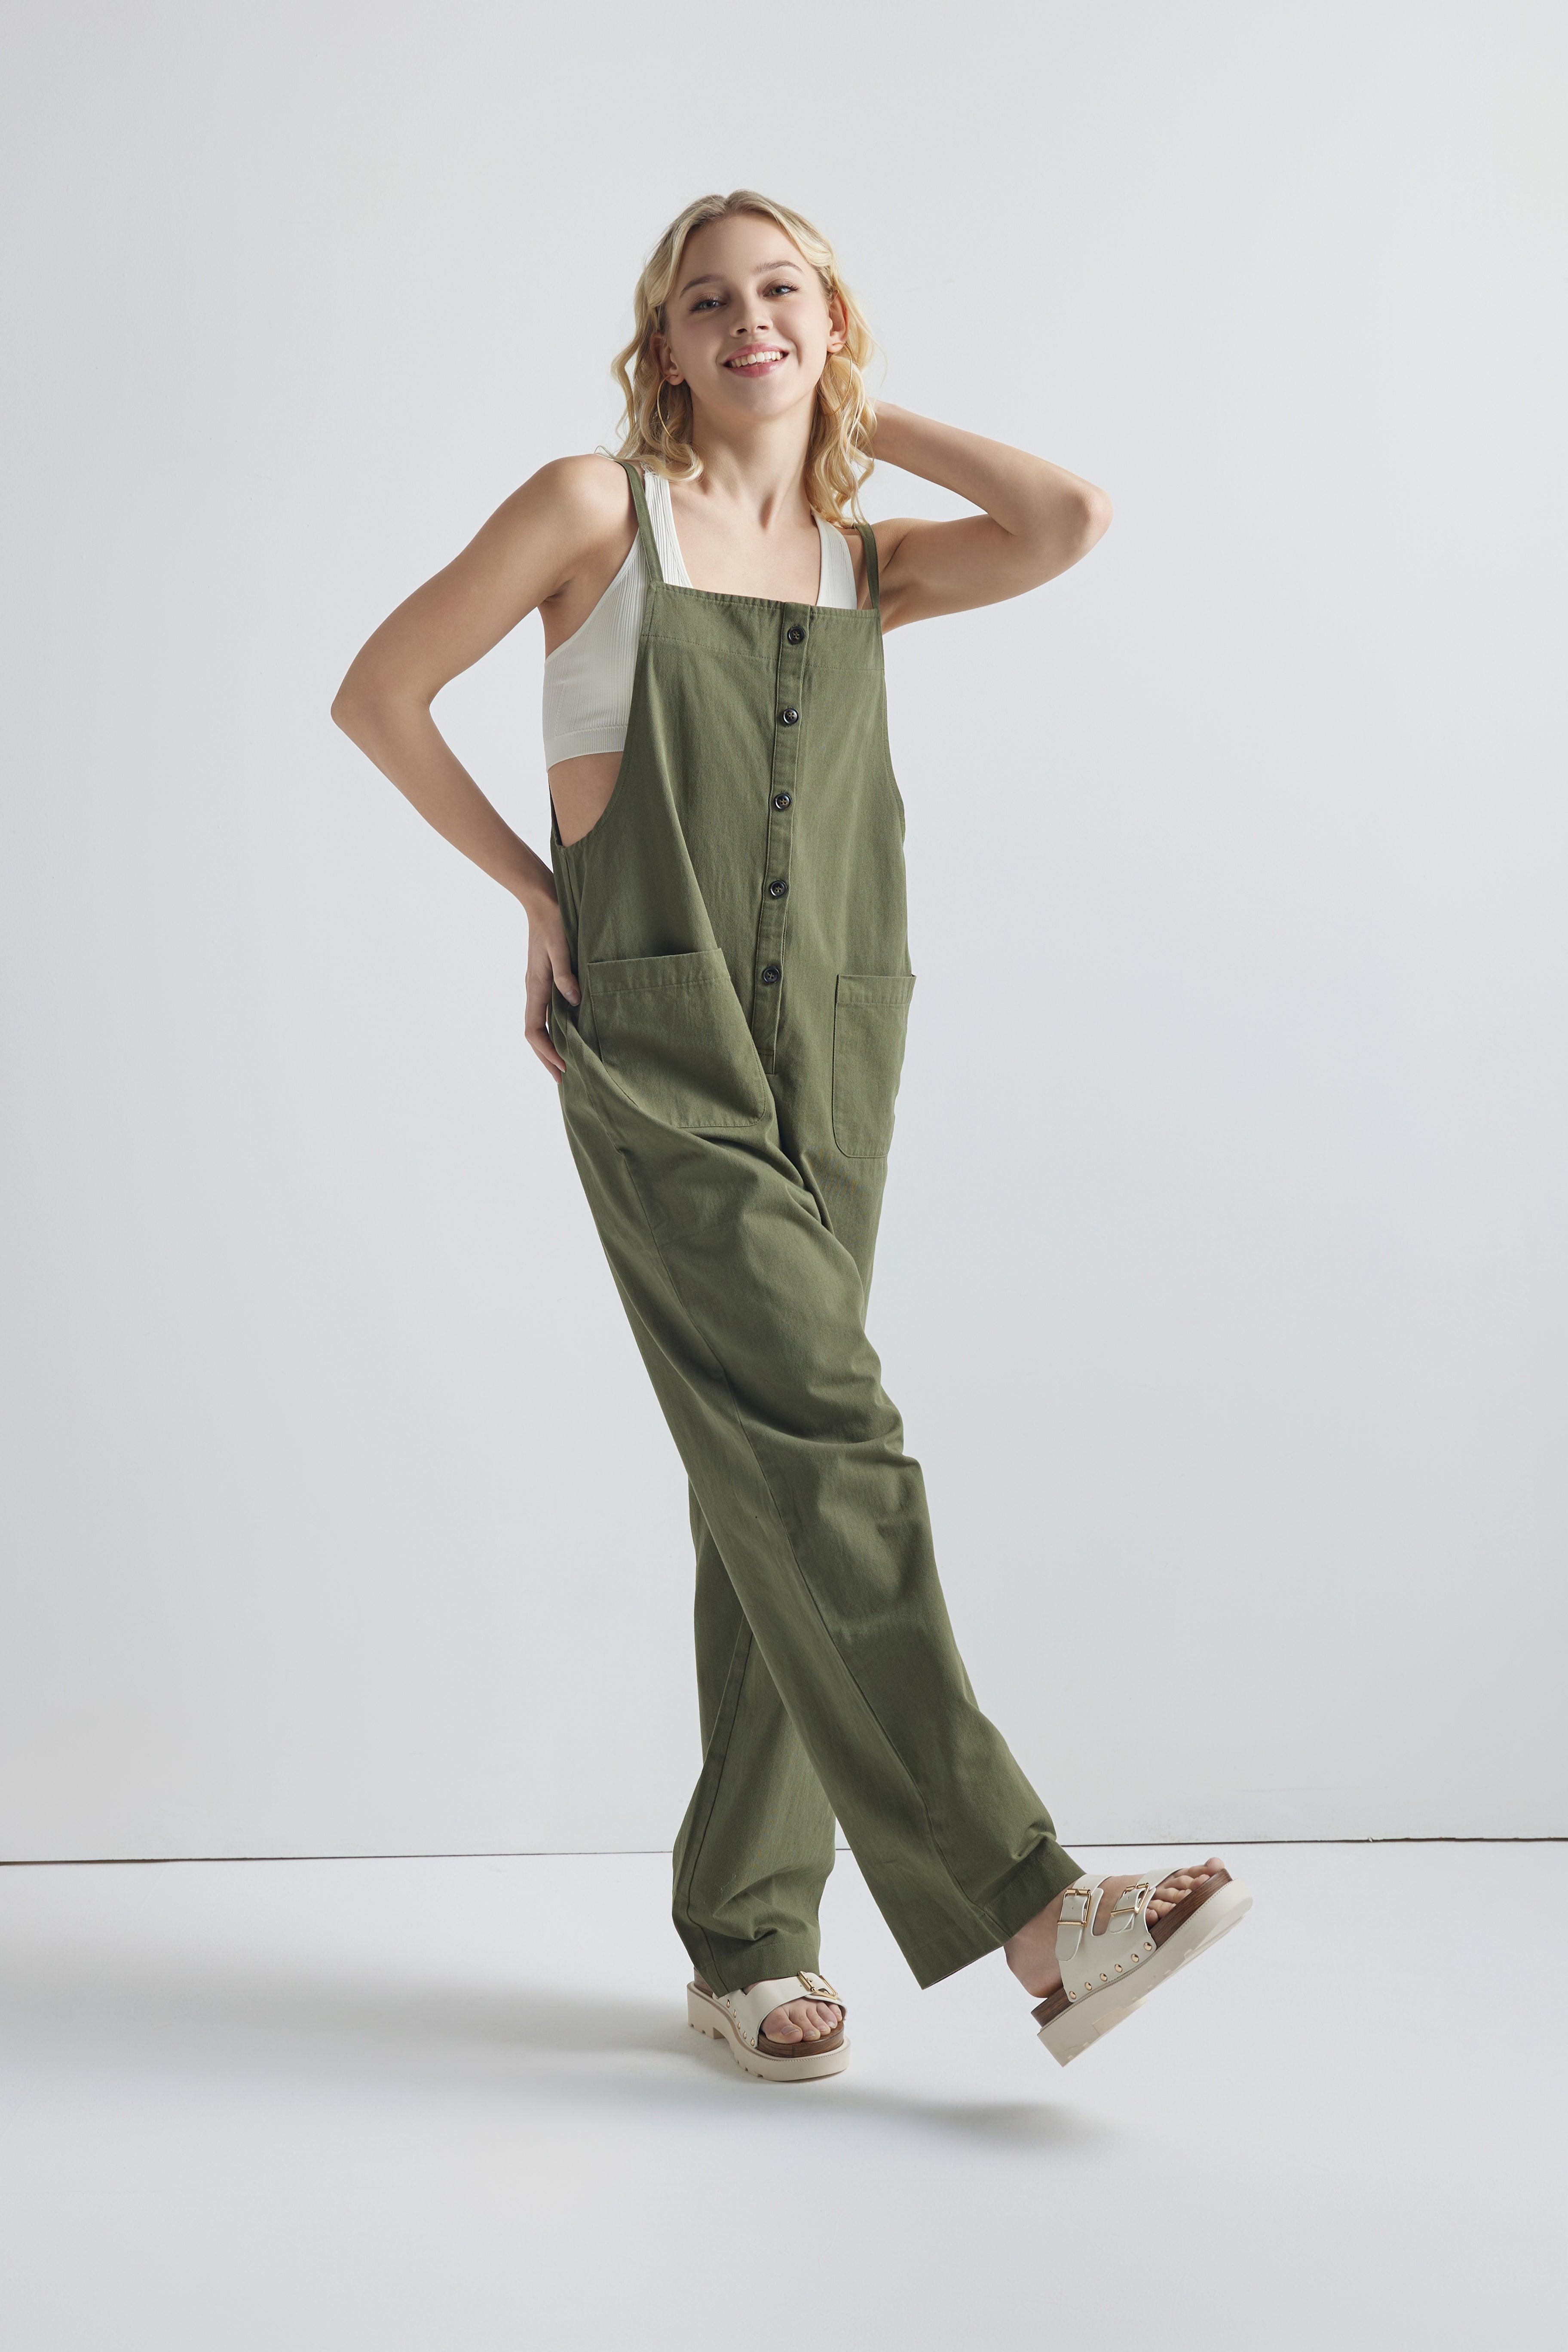 100% cotton Button Down Sleeveless Overalls Jumpsuit with Pockets - Olive - noflik